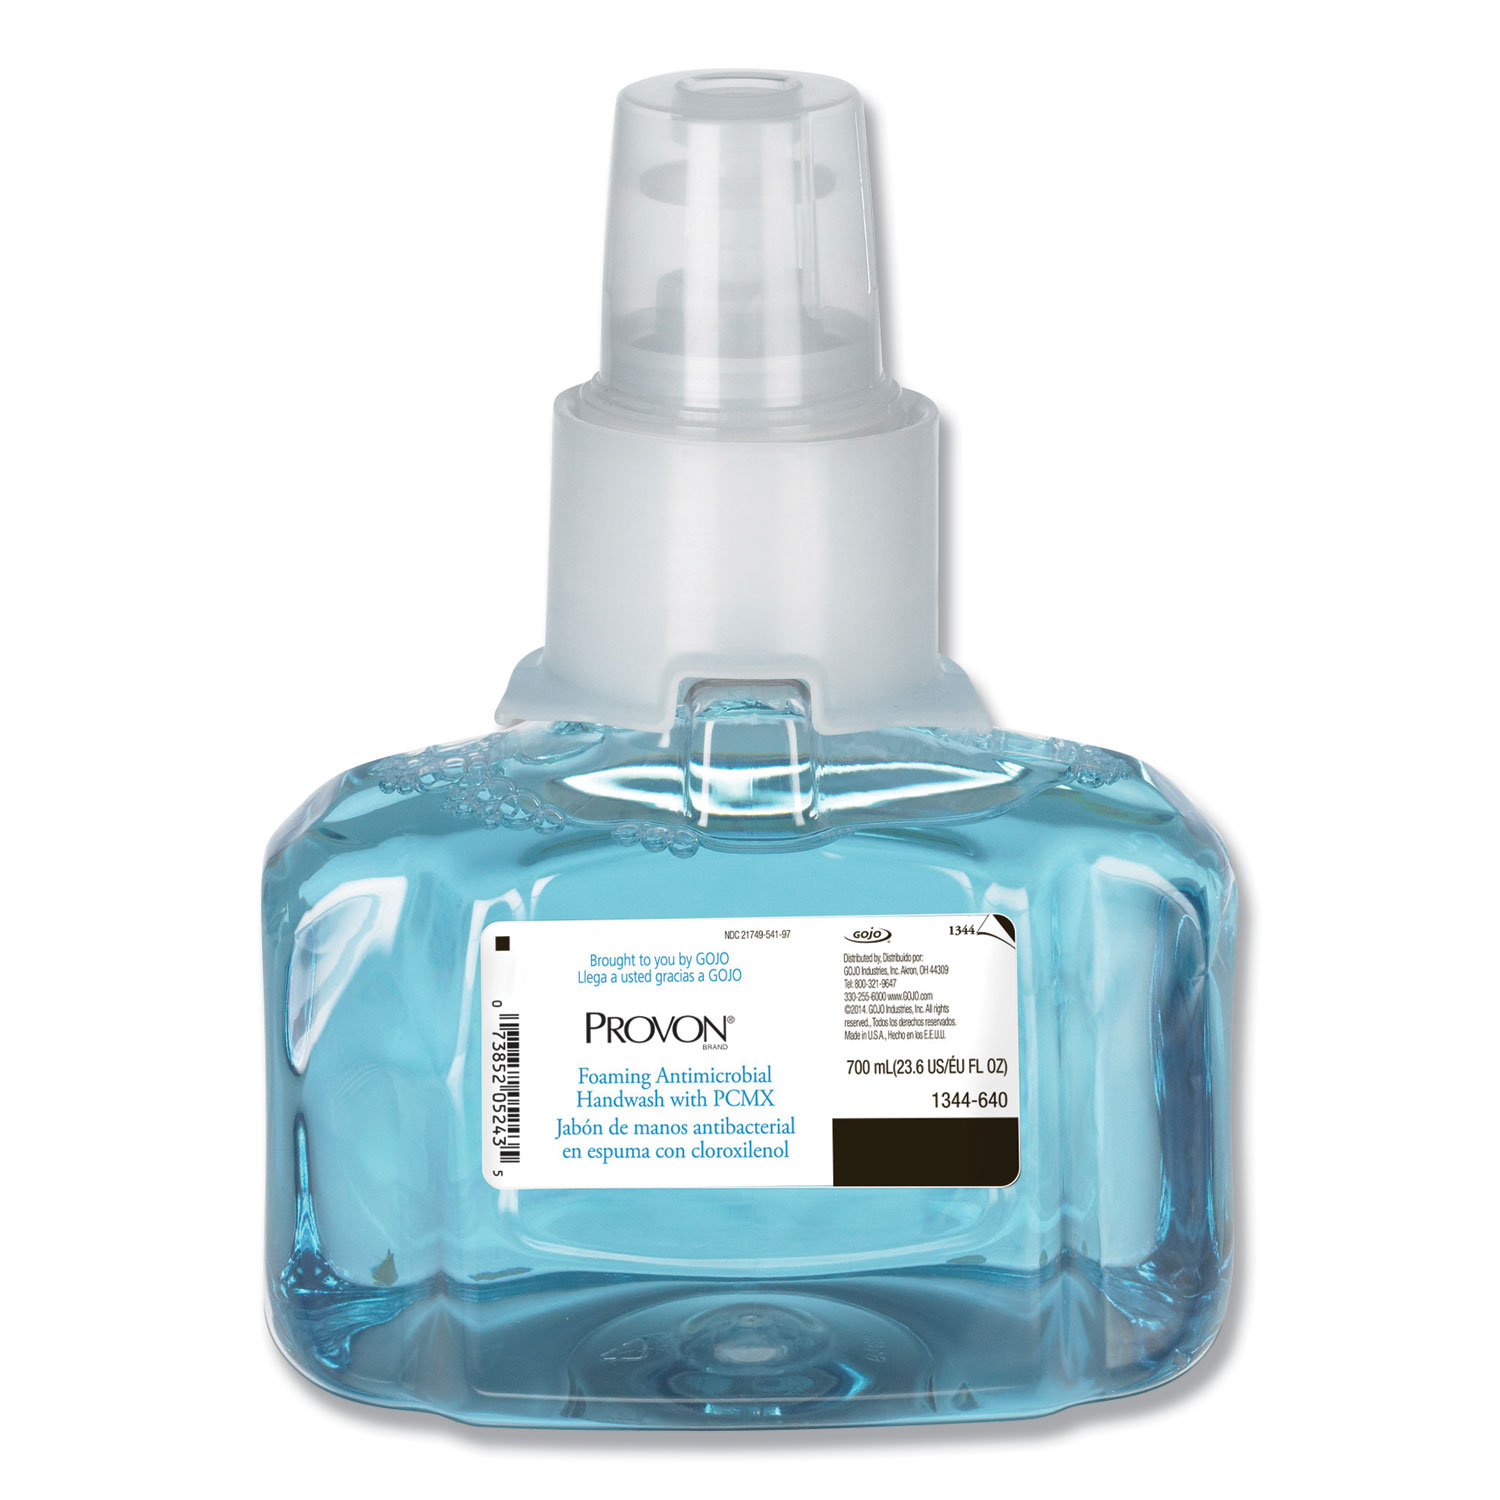  PROVON 1344-03 Foaming Antimicrobial Handwash with PCMX, Floral, 700 mL Refill, For LTX-7, 3/CT (GOJ134403) 